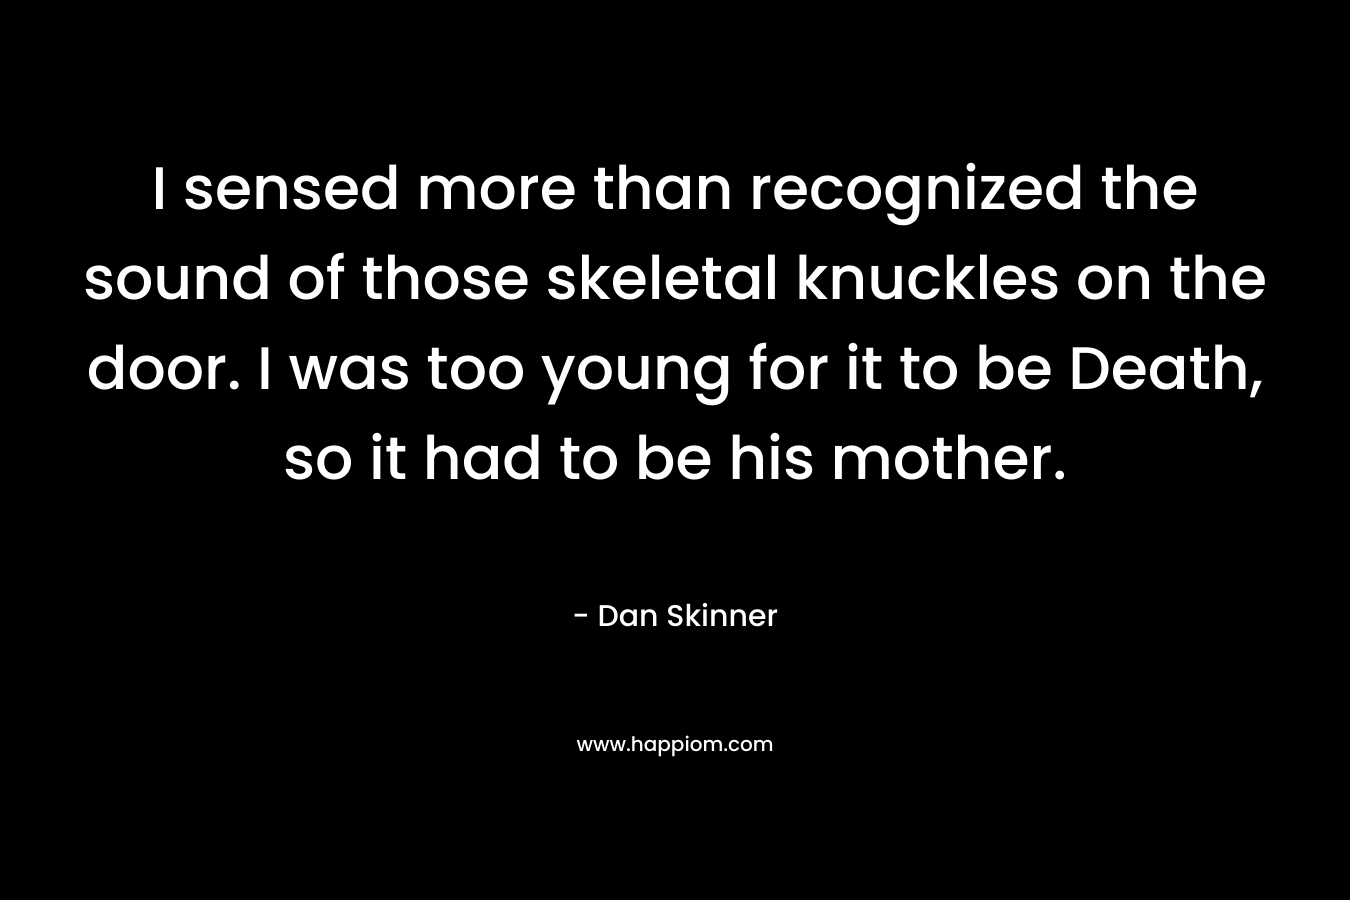 I sensed more than recognized the sound of those skeletal knuckles on the door. I was too young for it to be Death, so it had to be his mother. – Dan Skinner